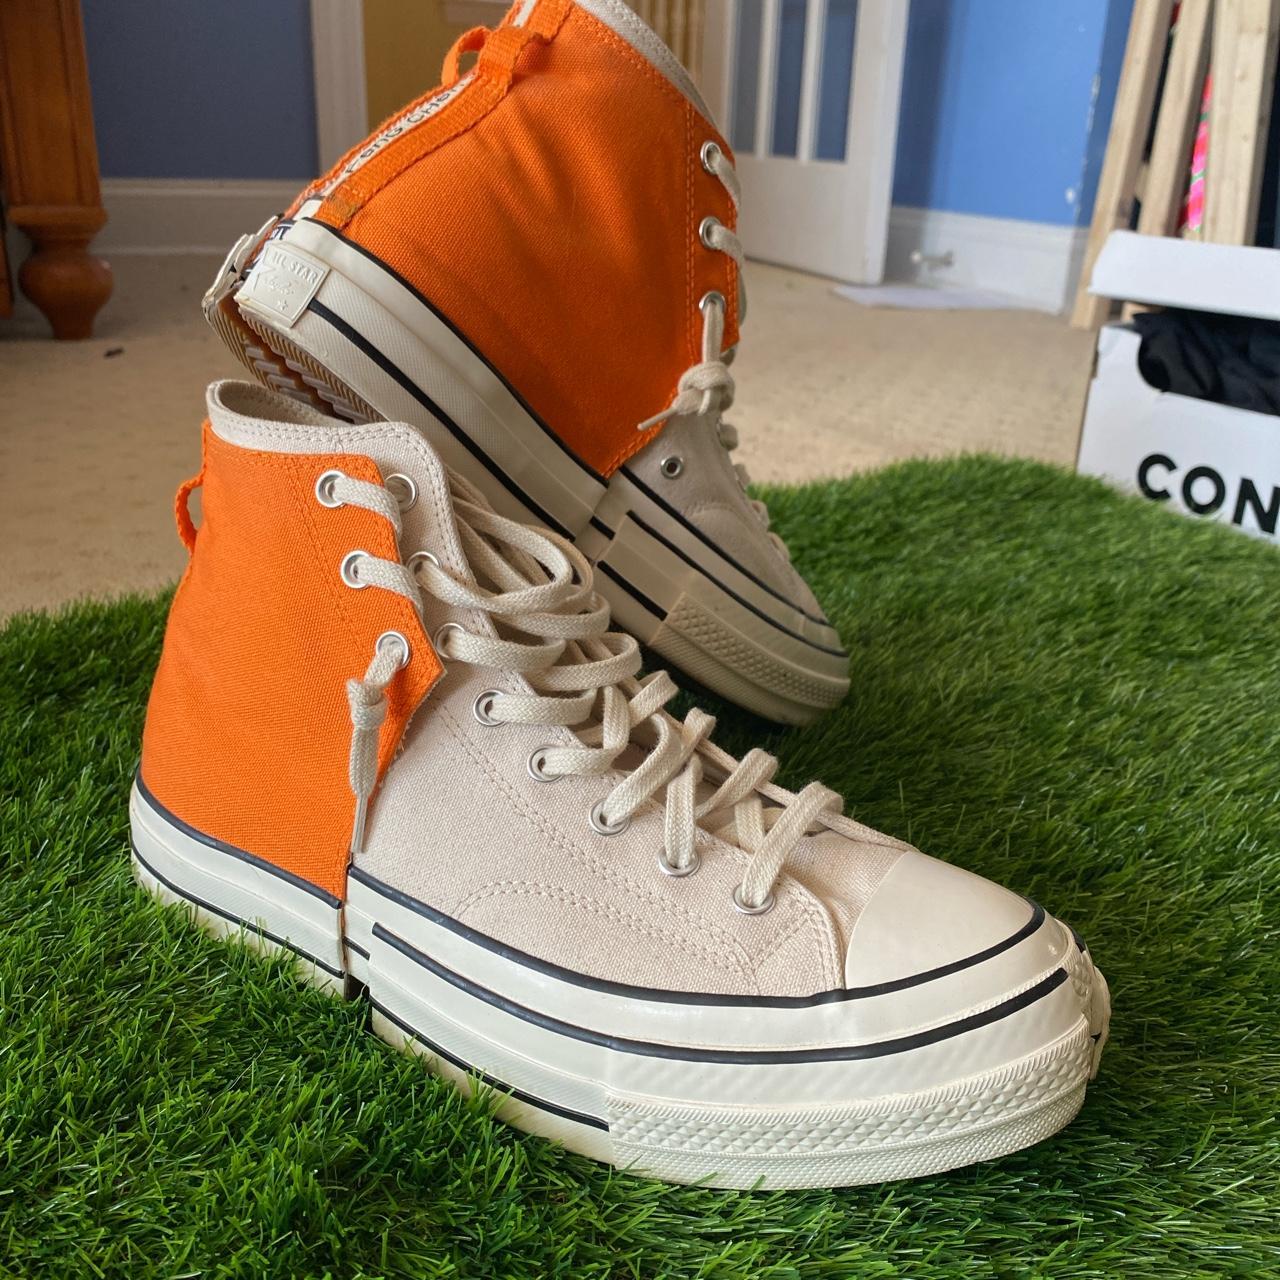 Feng Chen Wang Men's Cream and Orange Trainers (4)